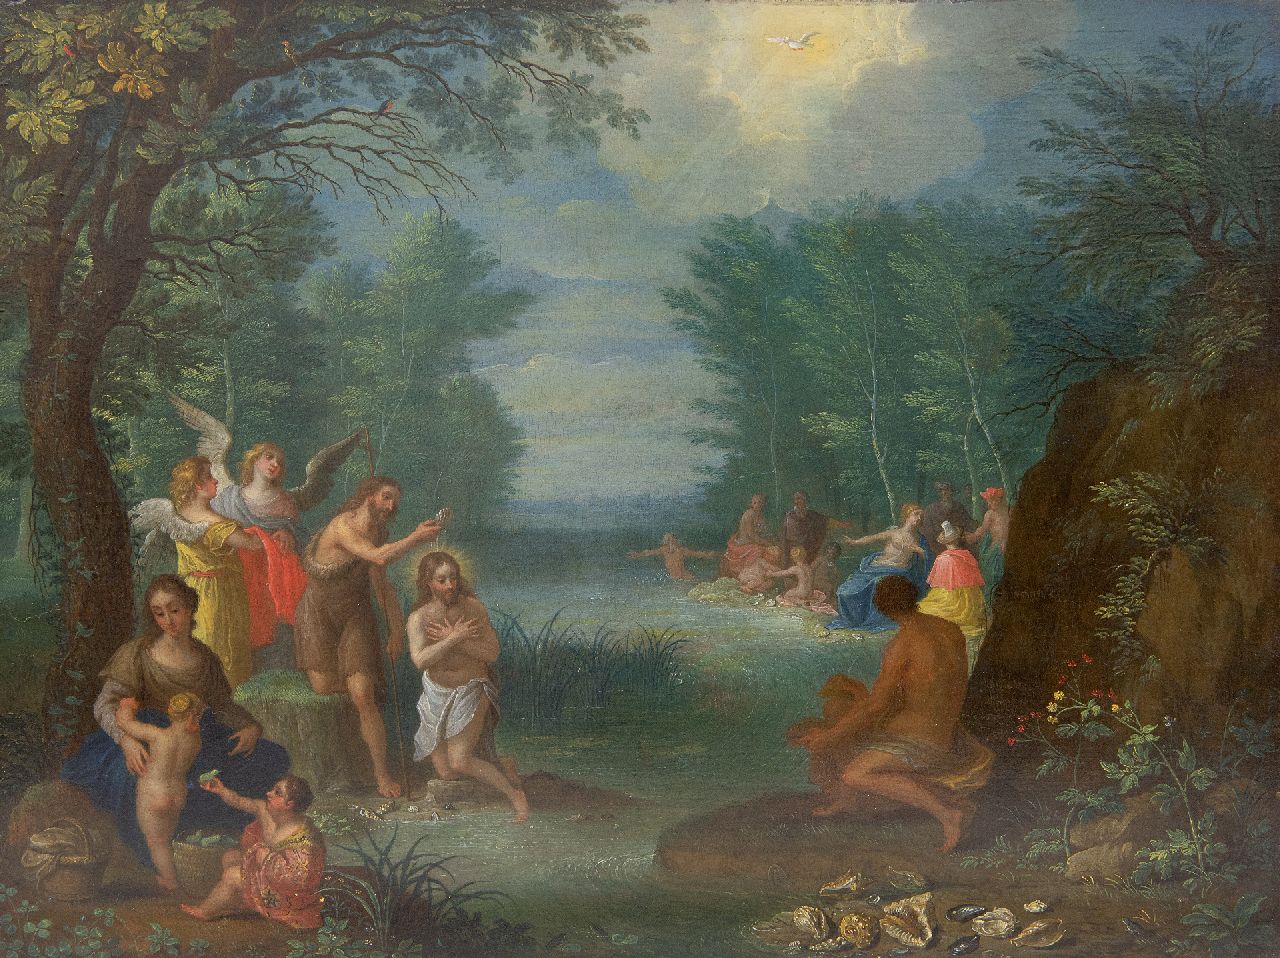 Beschey J.A.  | Jacob Andries Beschey | Paintings offered for sale | Baptism of Christ in the Jordan, oil on panel 24.3 x 31.9 cm